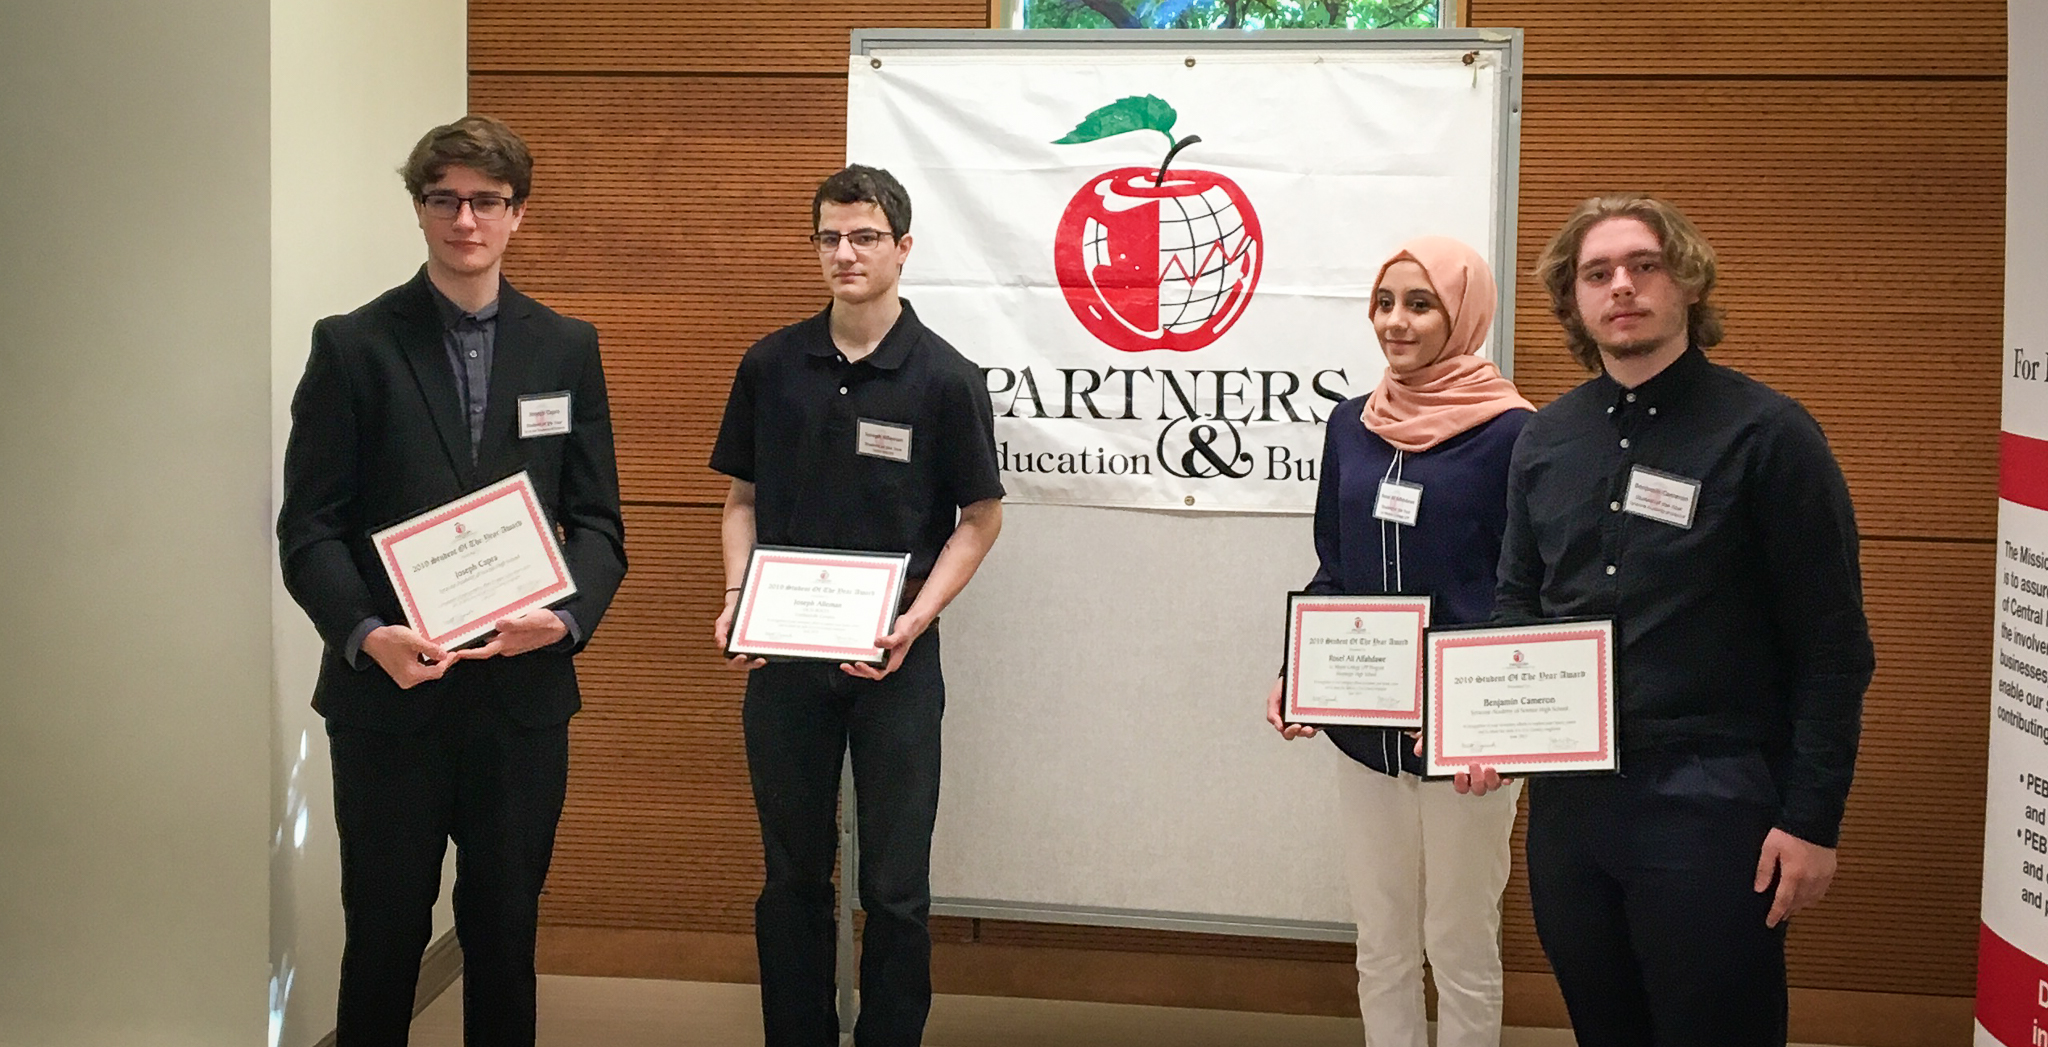 SASCS Atoms, Benjamin and Joseph were nominated for the Partners for Education and Business' Student of the Year award